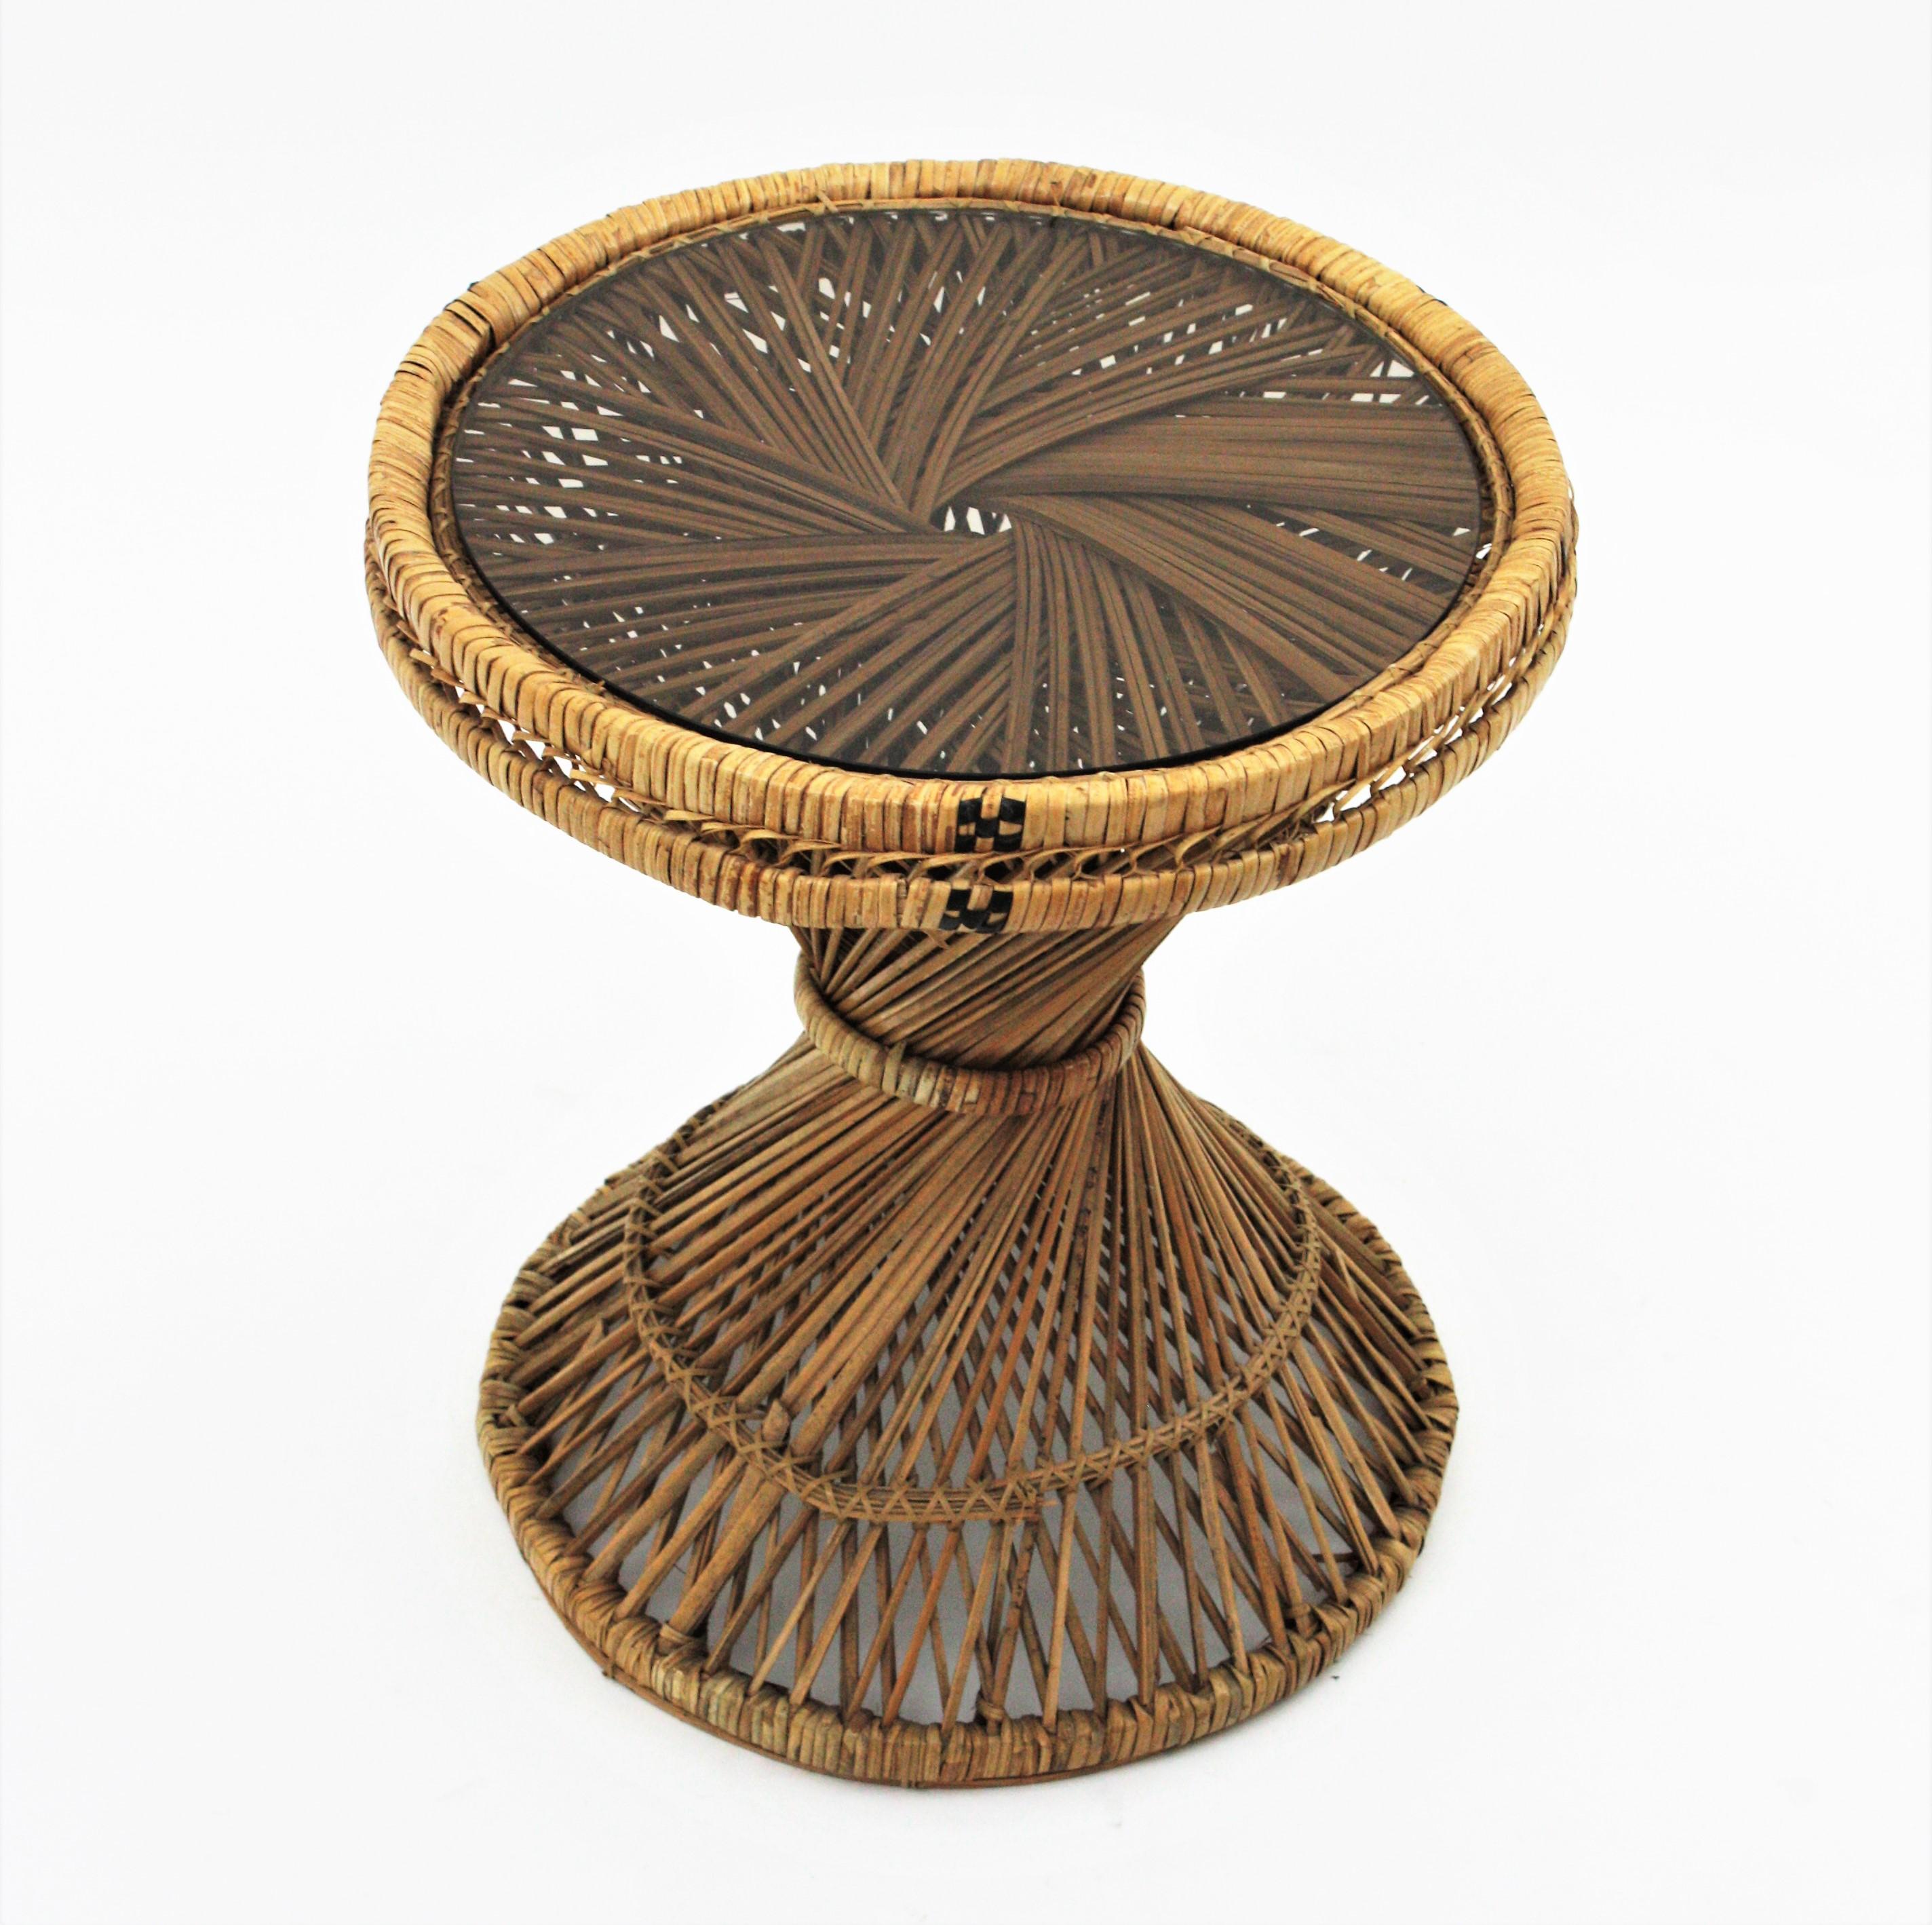 Spanish Woven Wicker Rattan Emmanuelle Peacock Small Coffee Table, Spain, 1960s For Sale